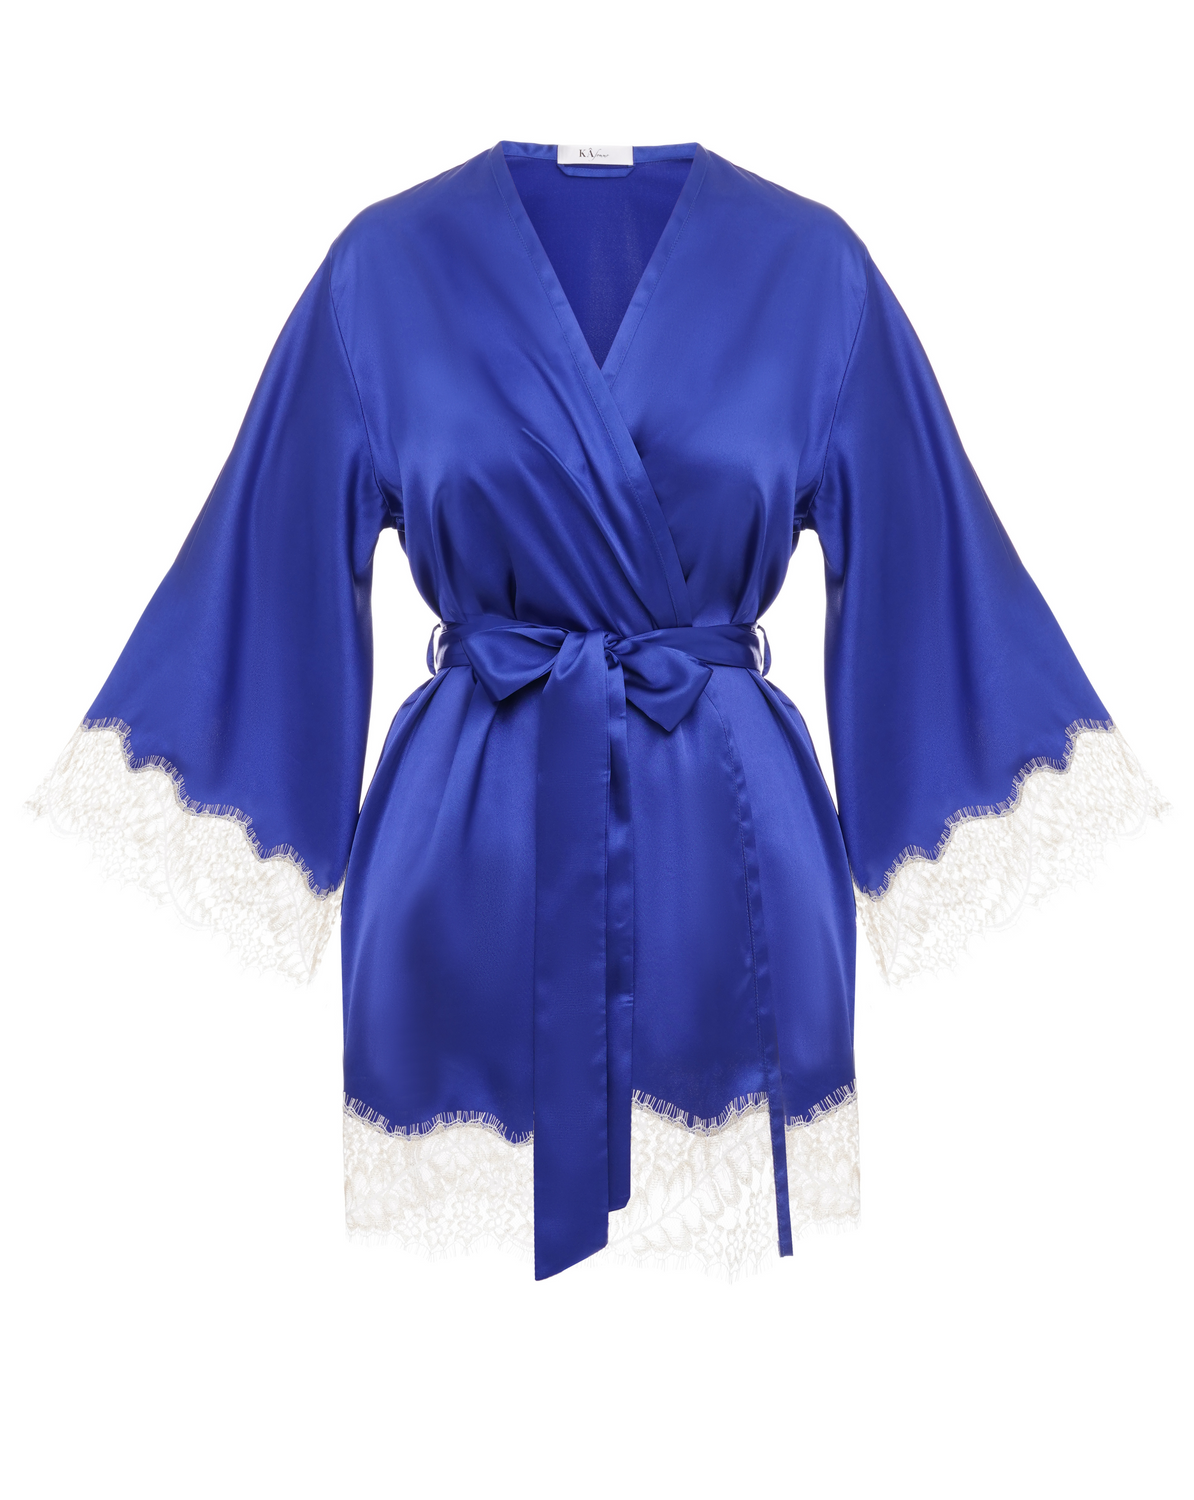 Fusion Blue Robe and Nightgown Set